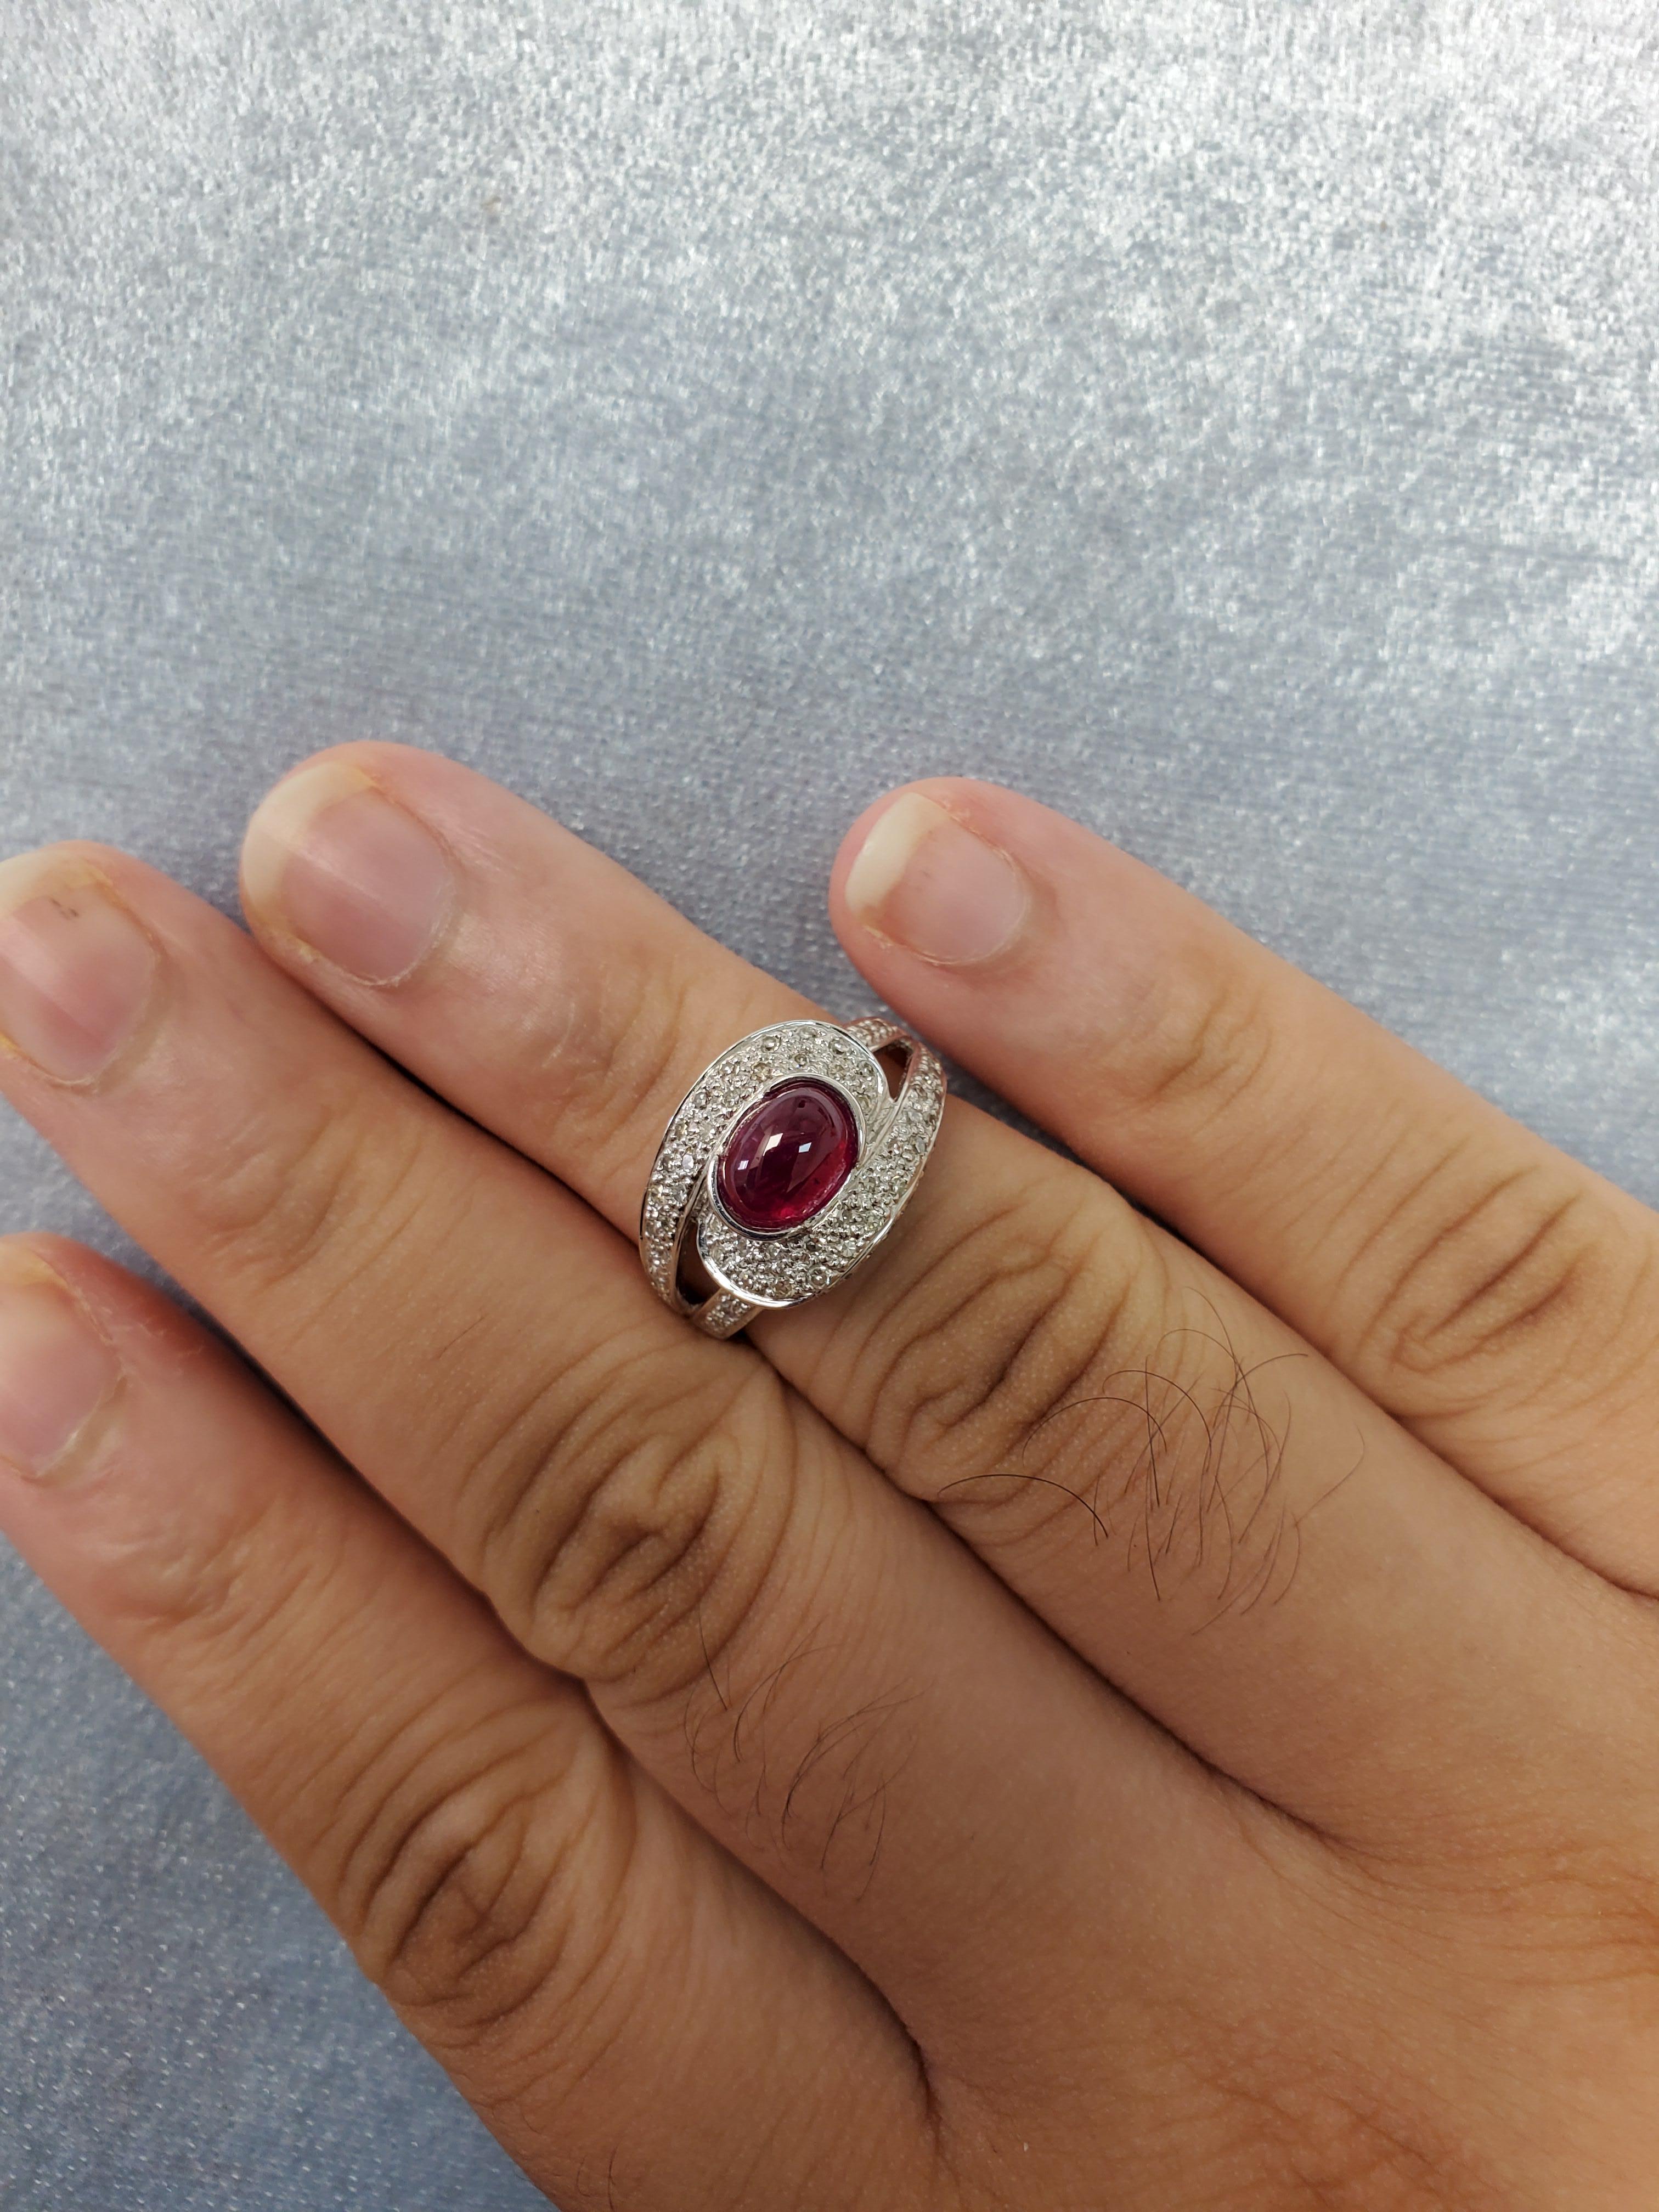 Details about   4 Ct Cabochon Ruby & Sim Diamond Women's Silver Cocktail Ring 14K White Gold FN 